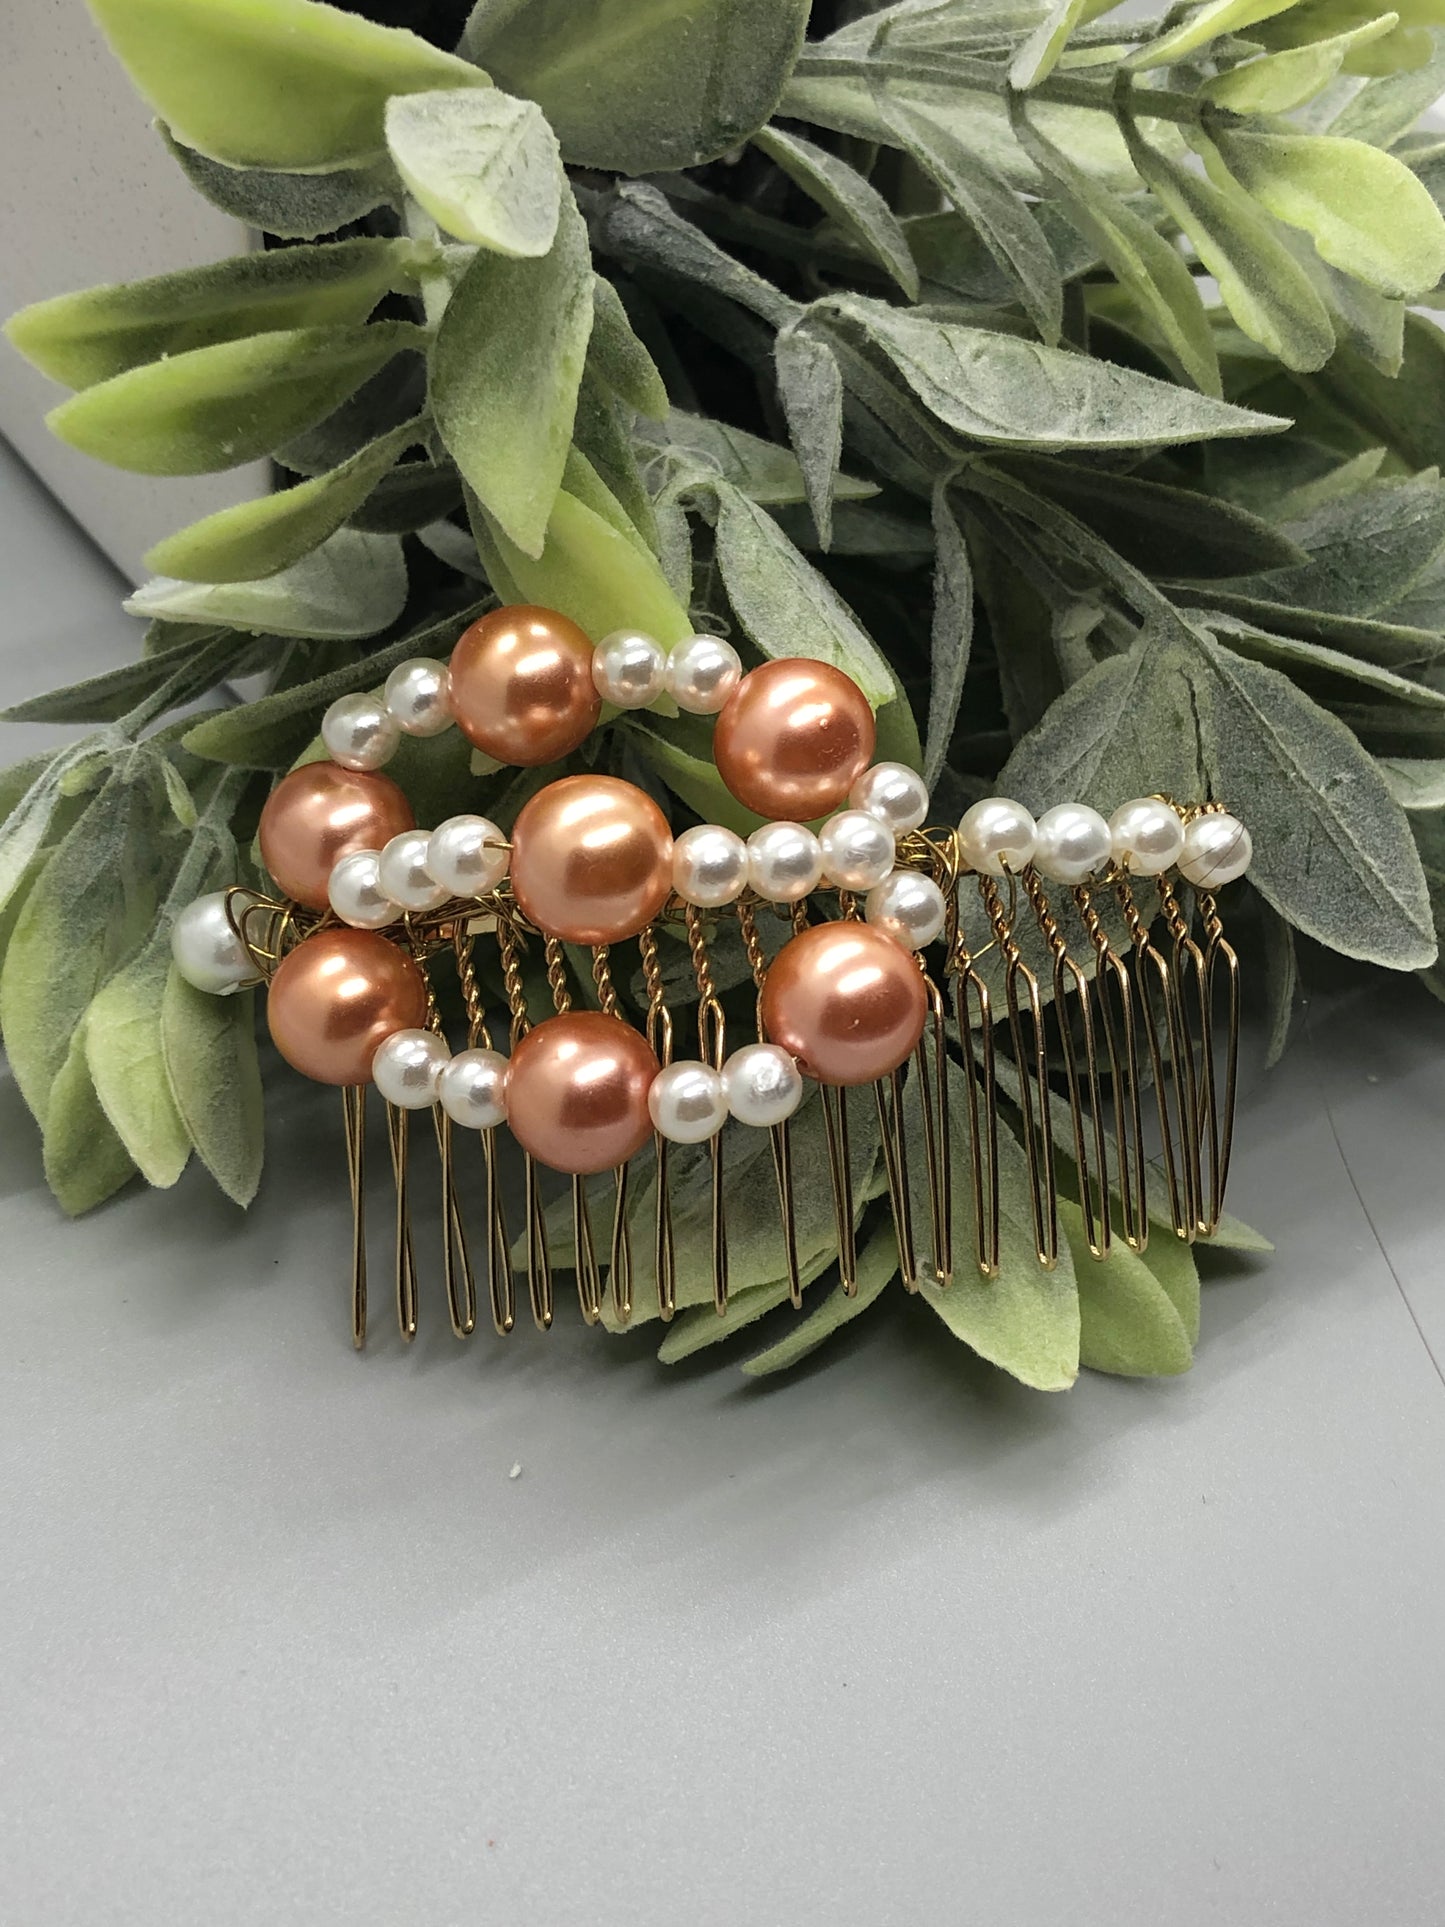 Peach White Large Beads  Side Hair Comb Gold Metal Hair 3.5" Hair Comb Retro Vintage Style 1 pc